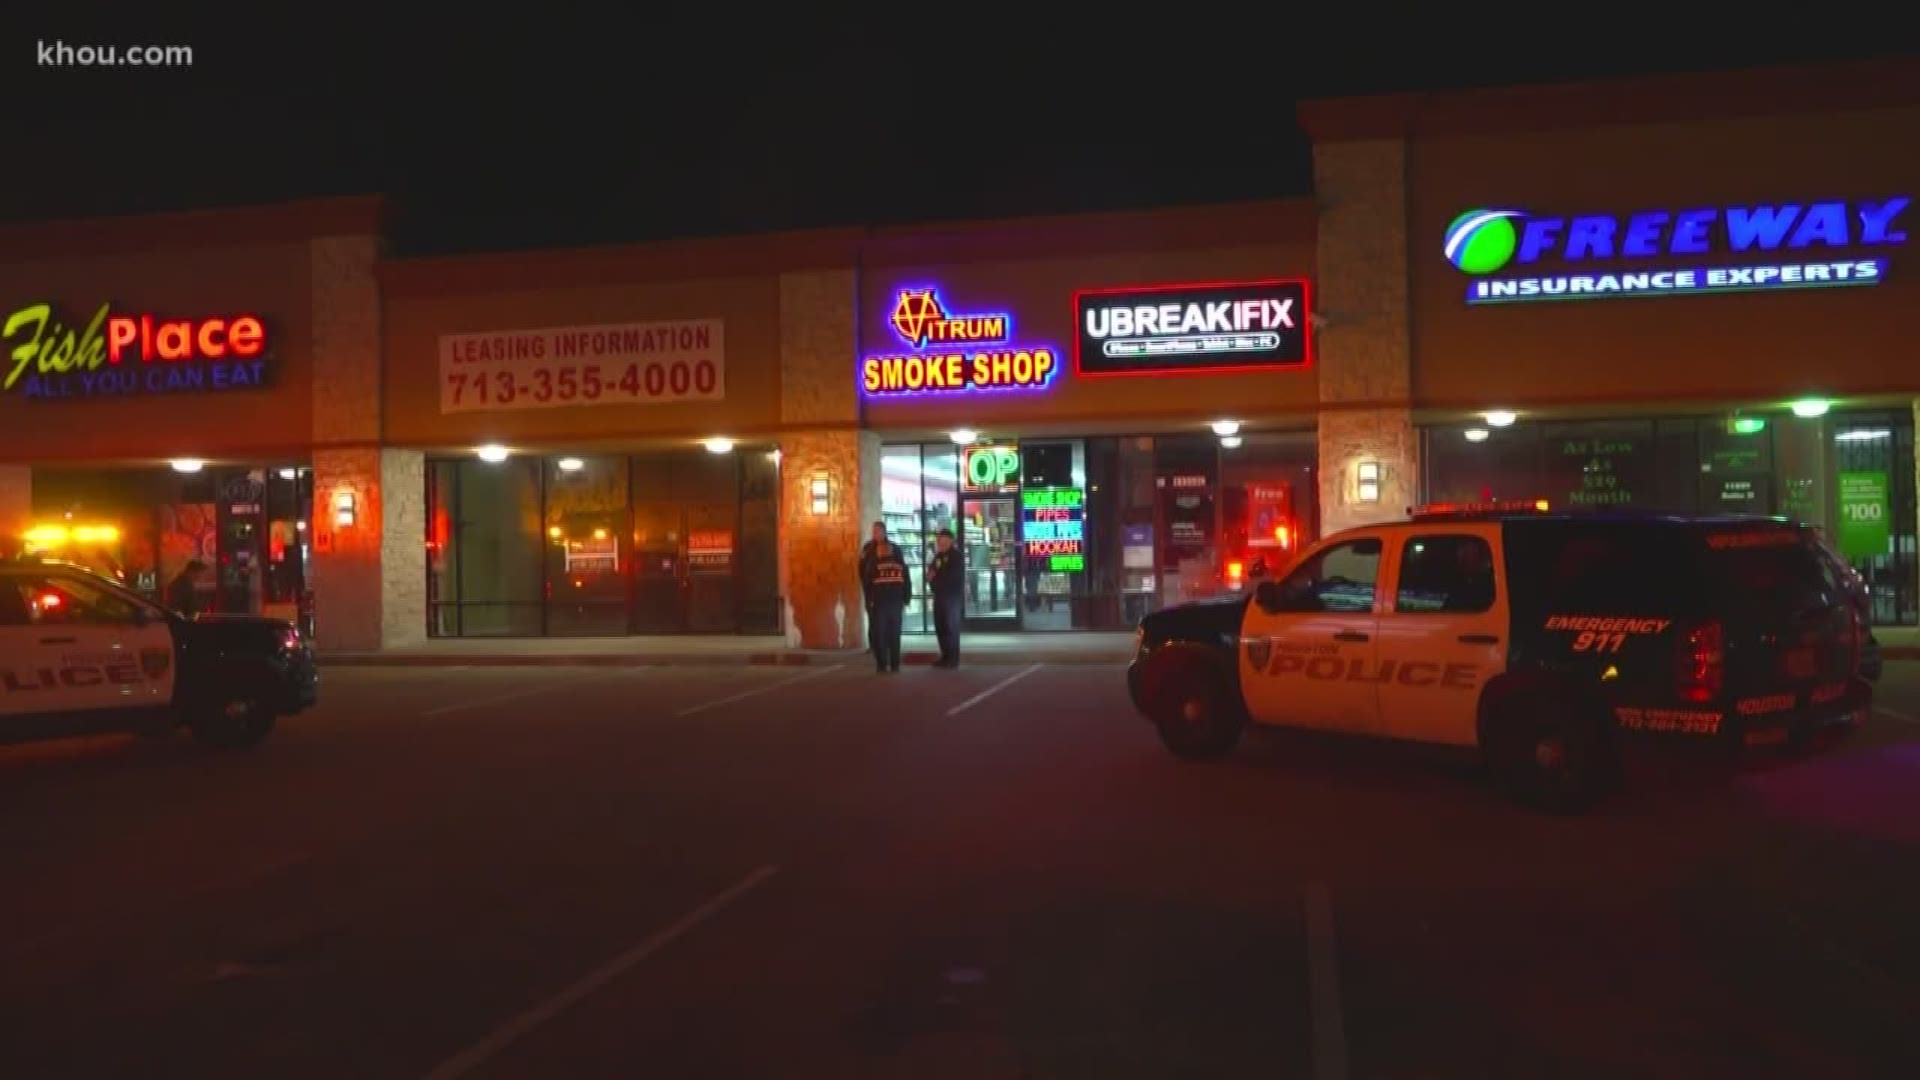 Houston police are looking for a robbery suspect who shot a smoke shop employee multiple times. The employee is expected to survive.